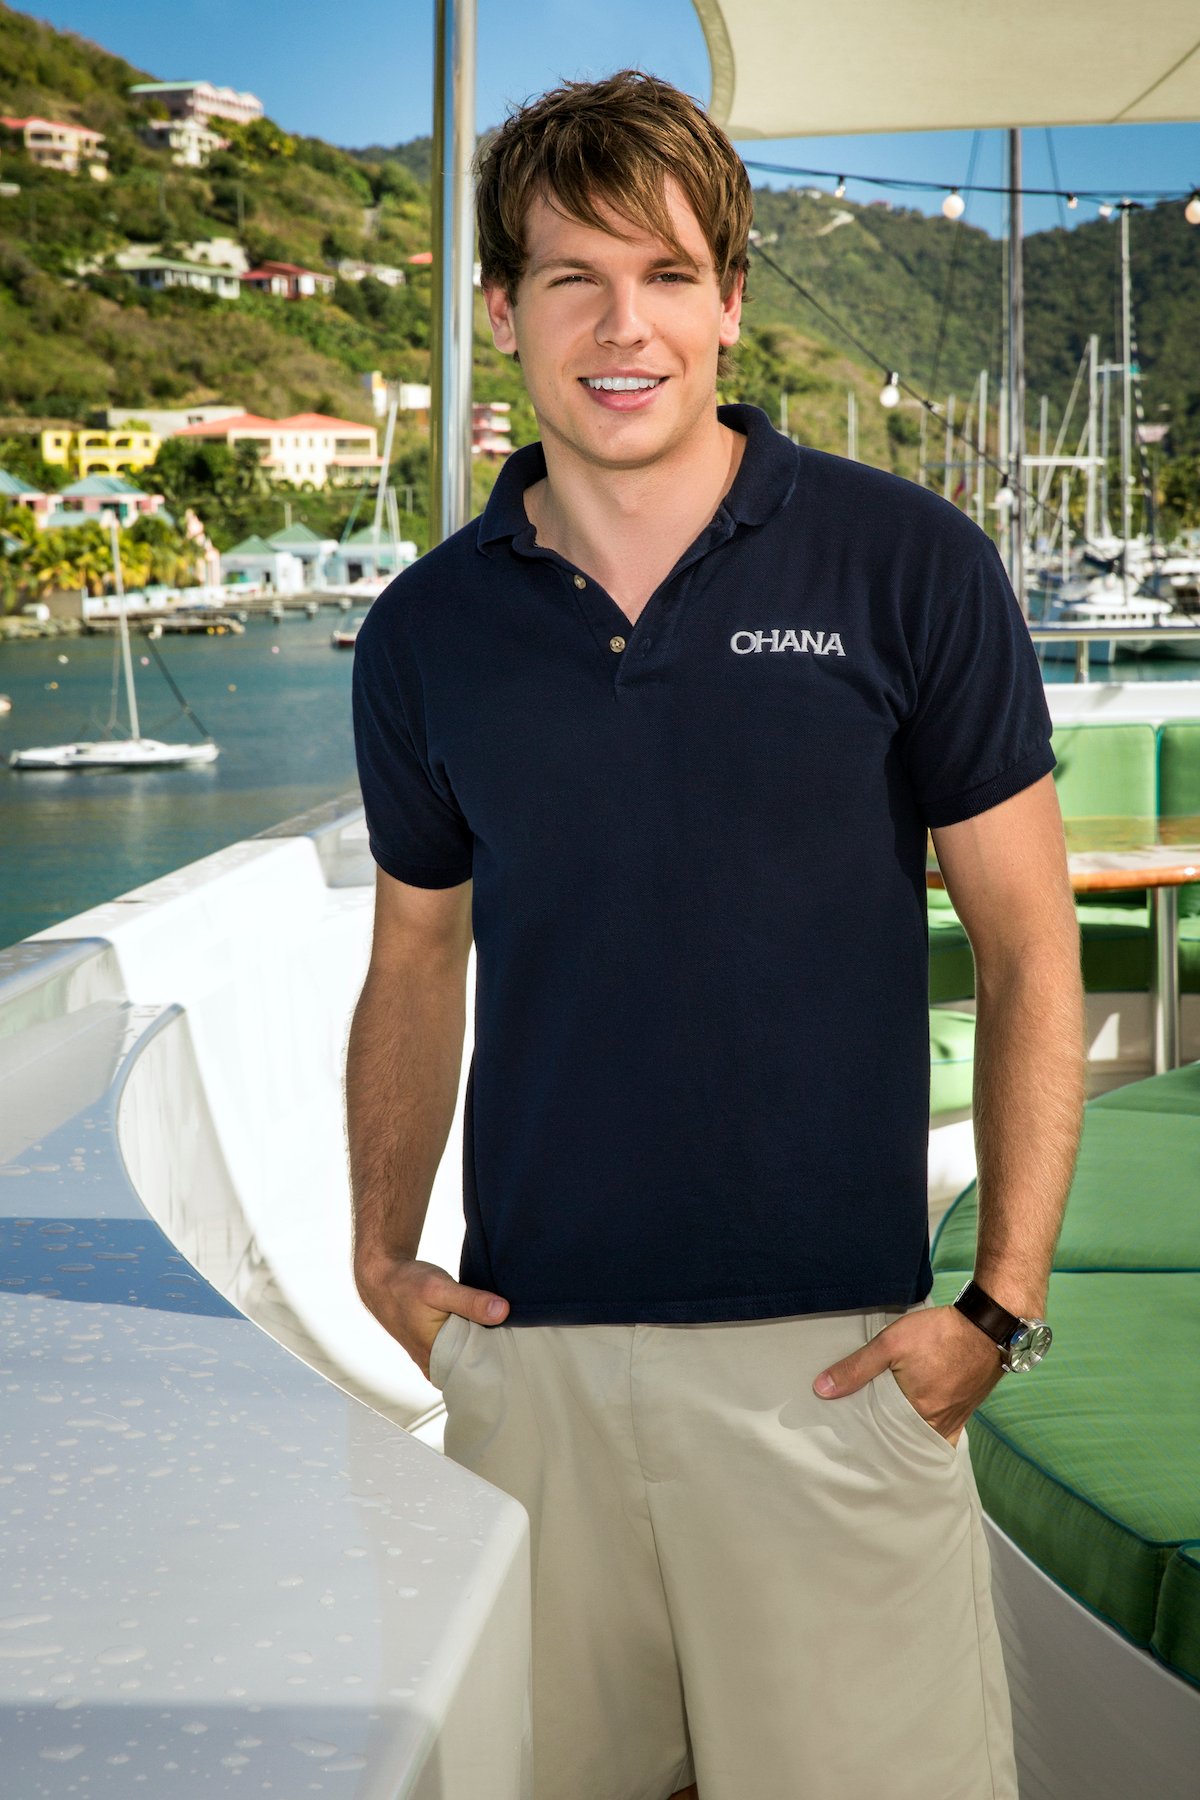 Andrew Sturby from Below Deck Season 2 cast photo